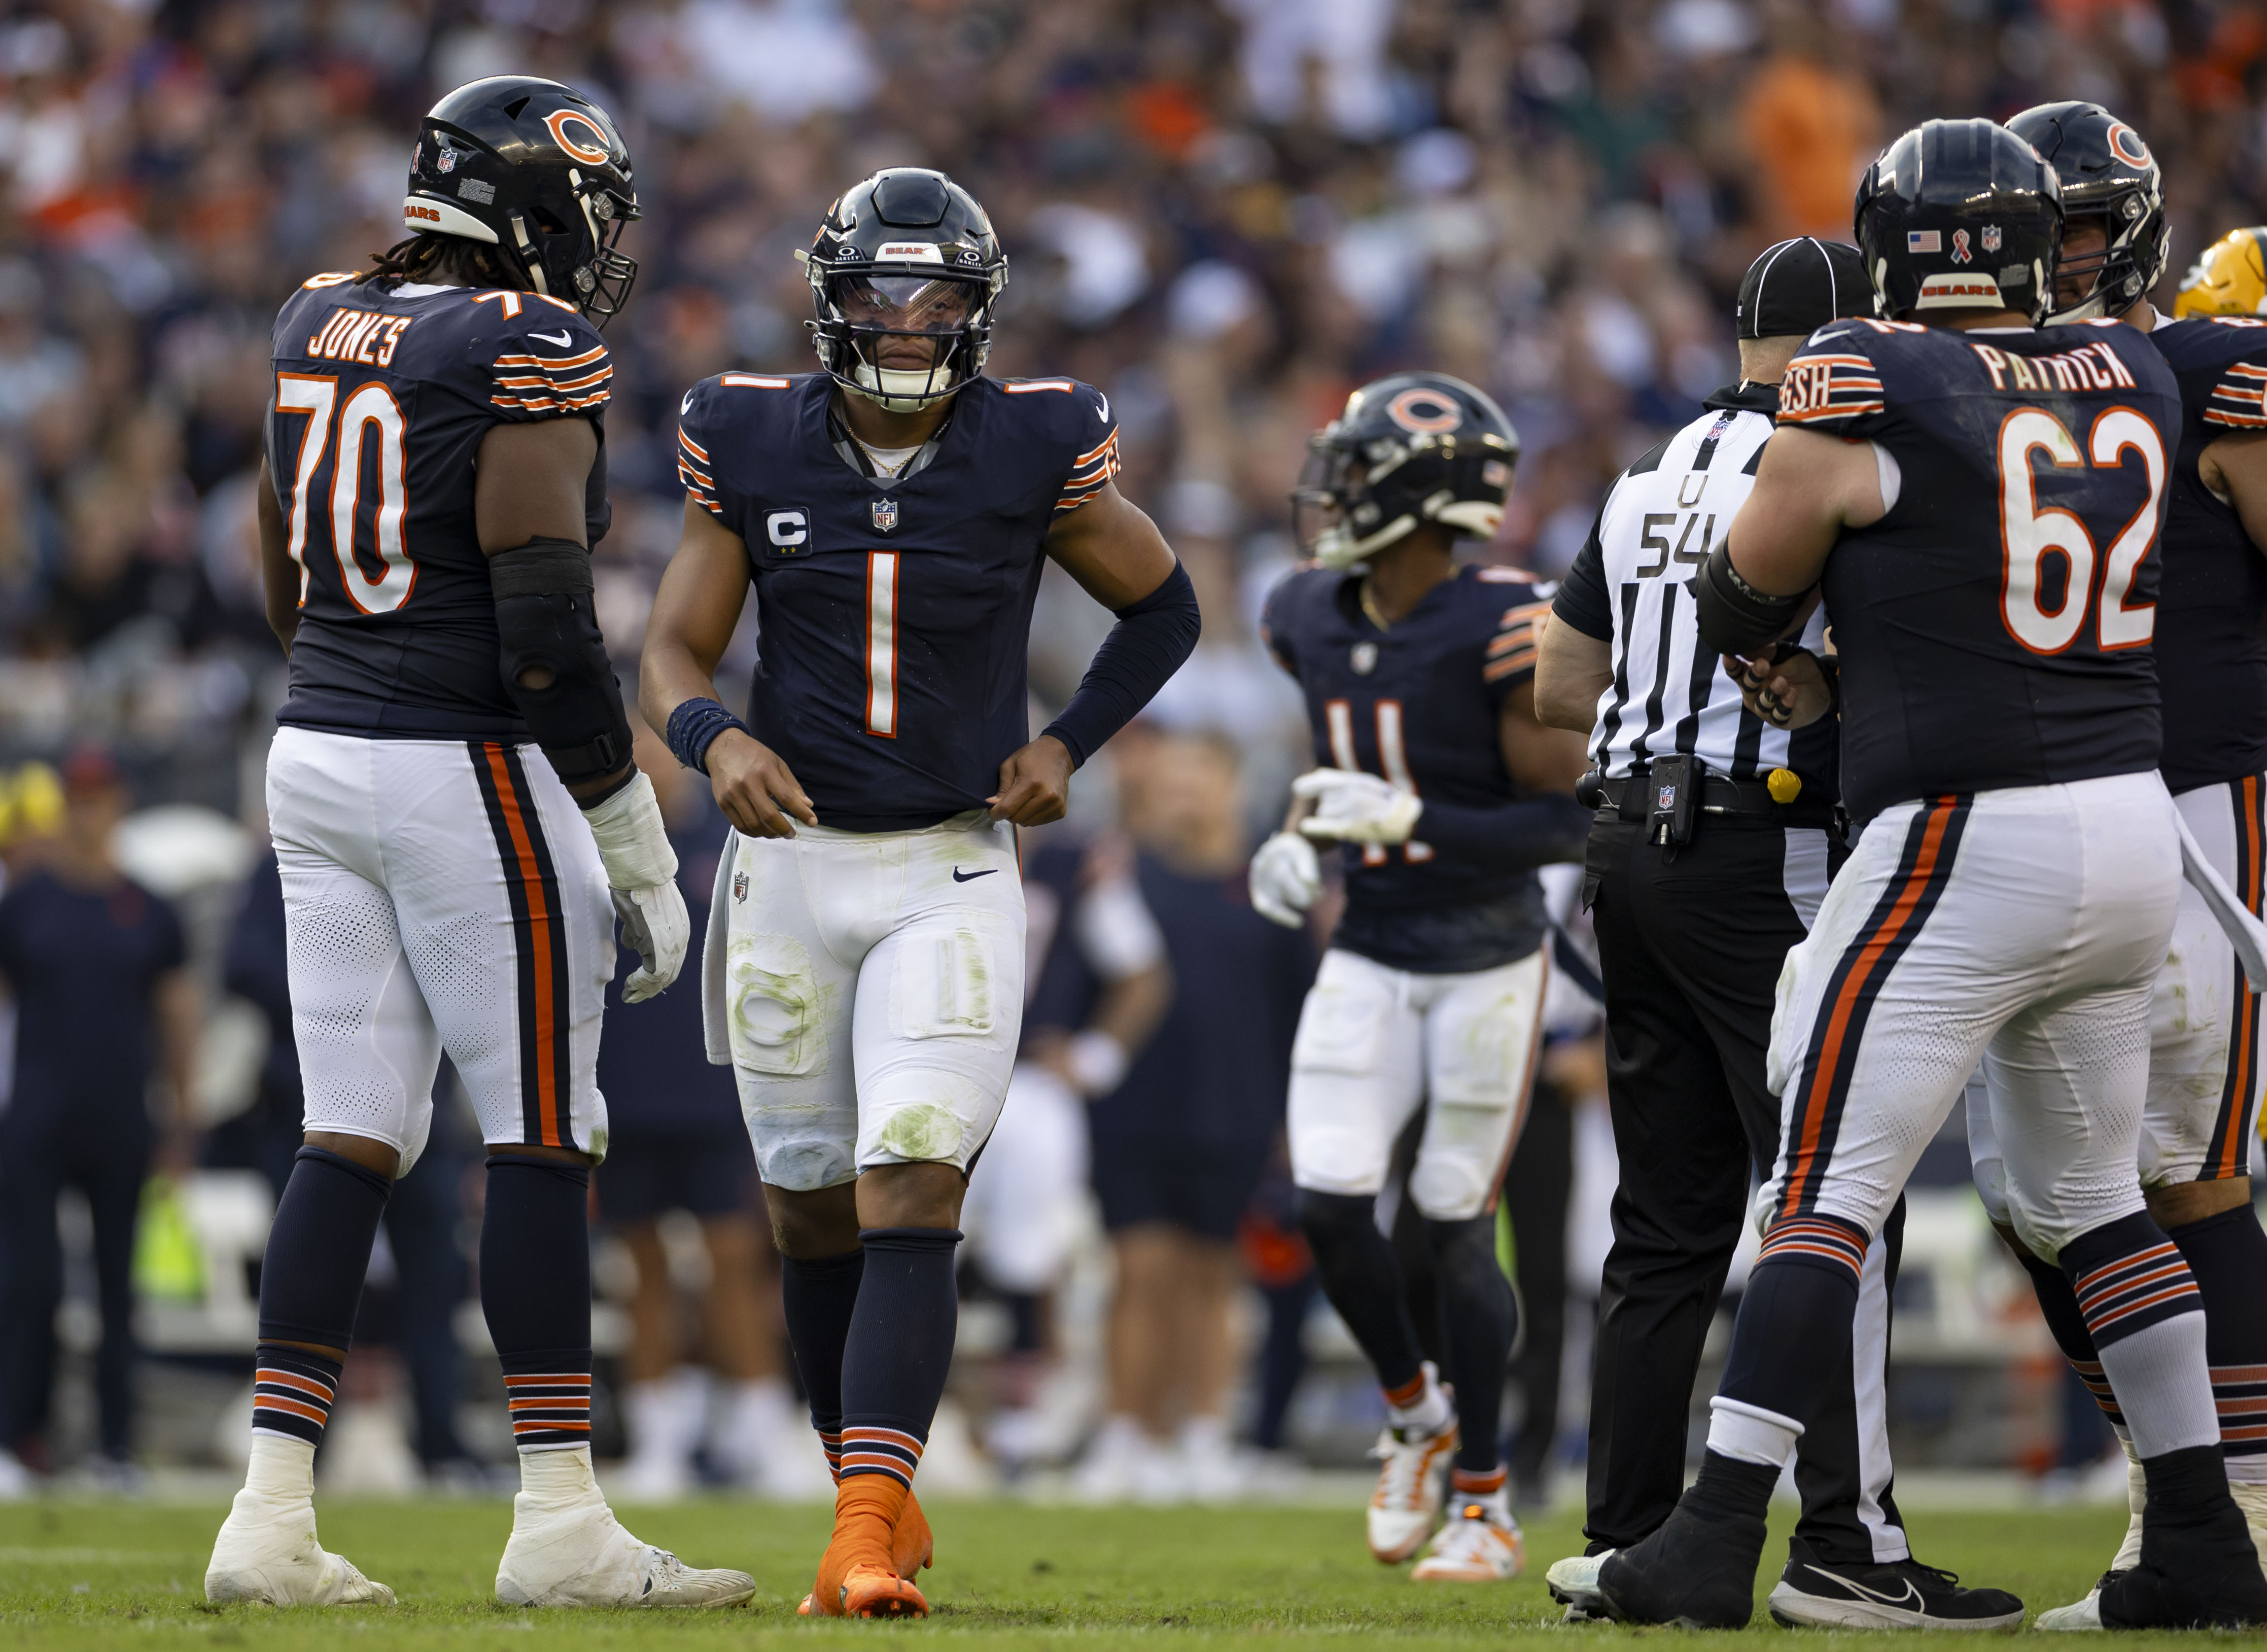 Dave Wannstedt: The Bears are going to have to throw the ball to win